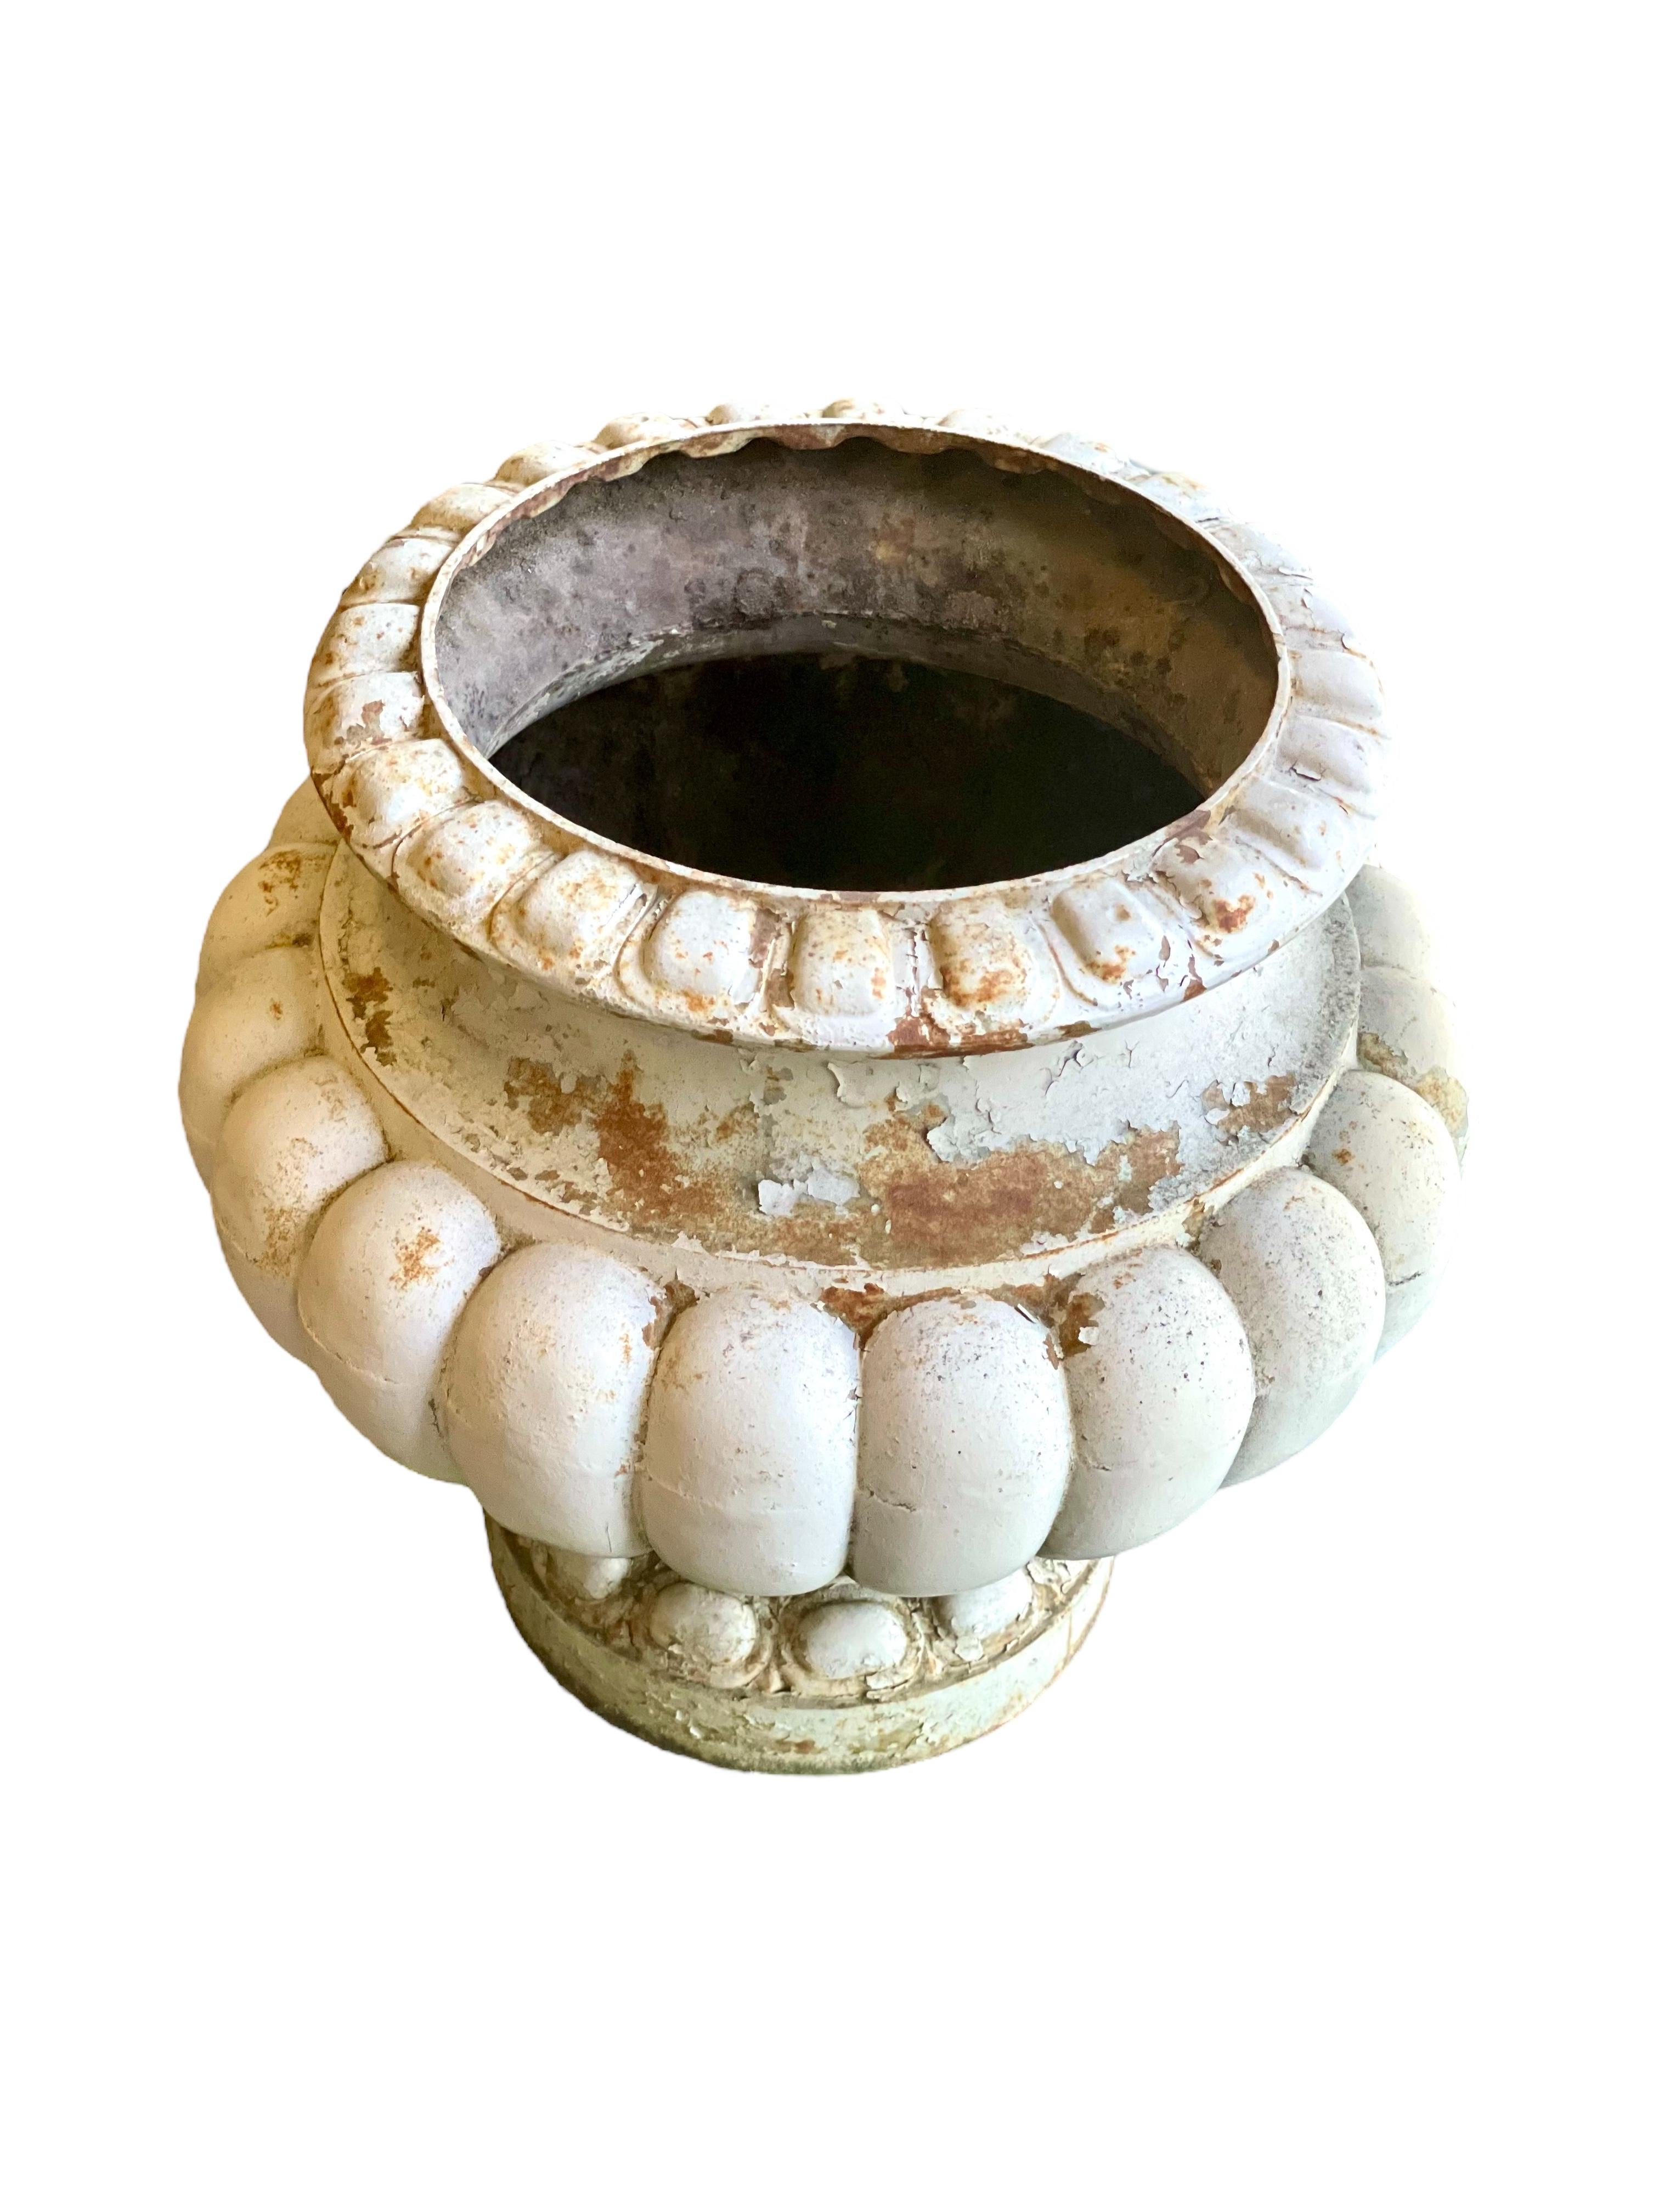 A 'pot-bellied' garden urn in grey-lacquered cast iron, and decorated with egg and dart mouldings round the lip, and classical gadrooning below. This eye-catching antique planter sits on a rounded base, and at 41cm high is the perfect size for a